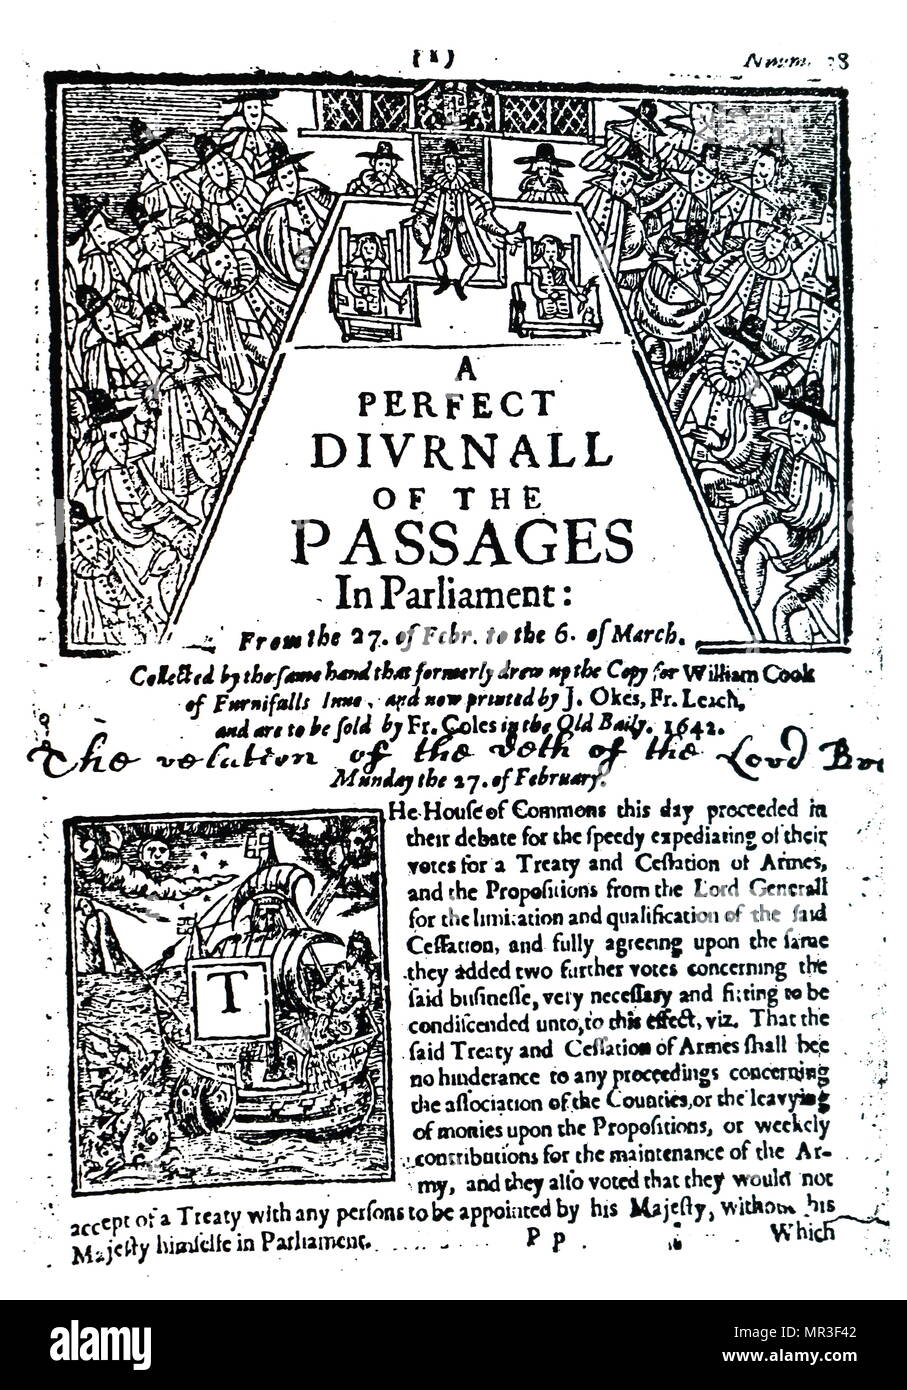 Front page from 'A Perfect Diurnall of the Passages in Parliament' which depicts the sitting of the House of Commons. Dated 17th century Stock Photo